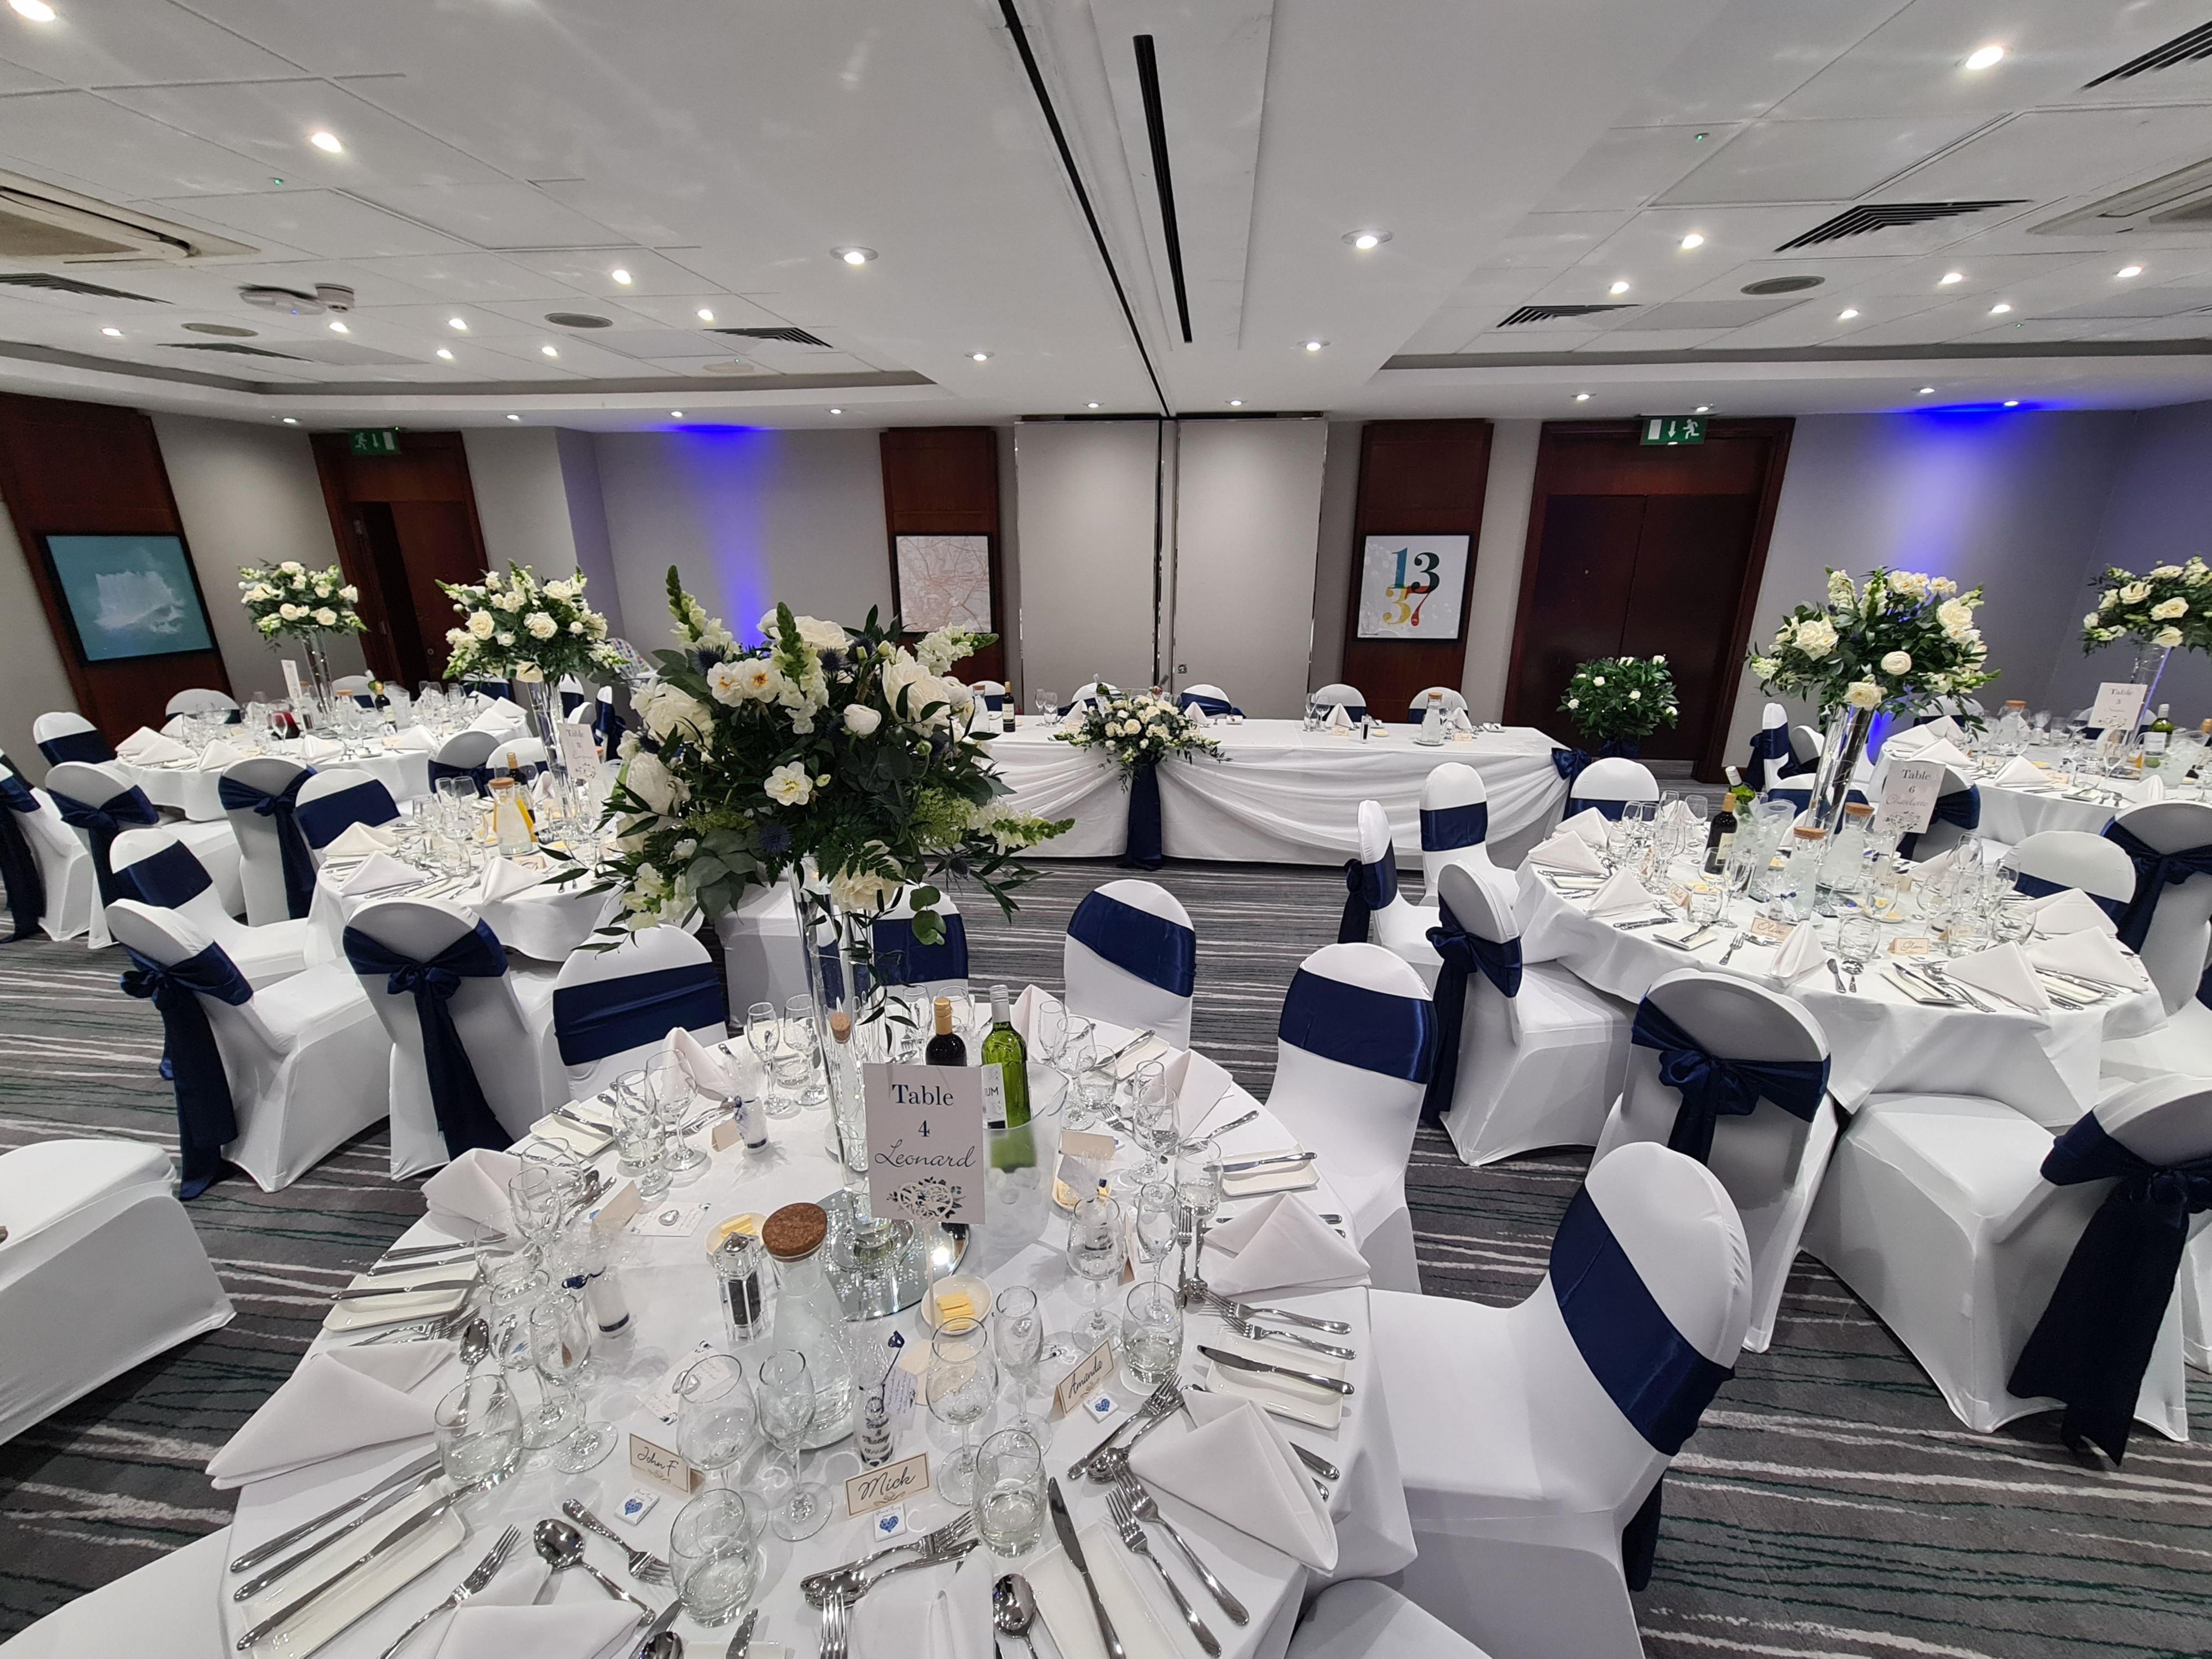 Conveniently located in South-Eastern Greater London, our appealing venue and dedicated team help create the perfect day for you. From an intimate gathering to a large wedding breakfast, you can relax and be assured that everything will be tailored to suit your needs. 

To organise a tour of our venue please contact us on 01322 625 577 